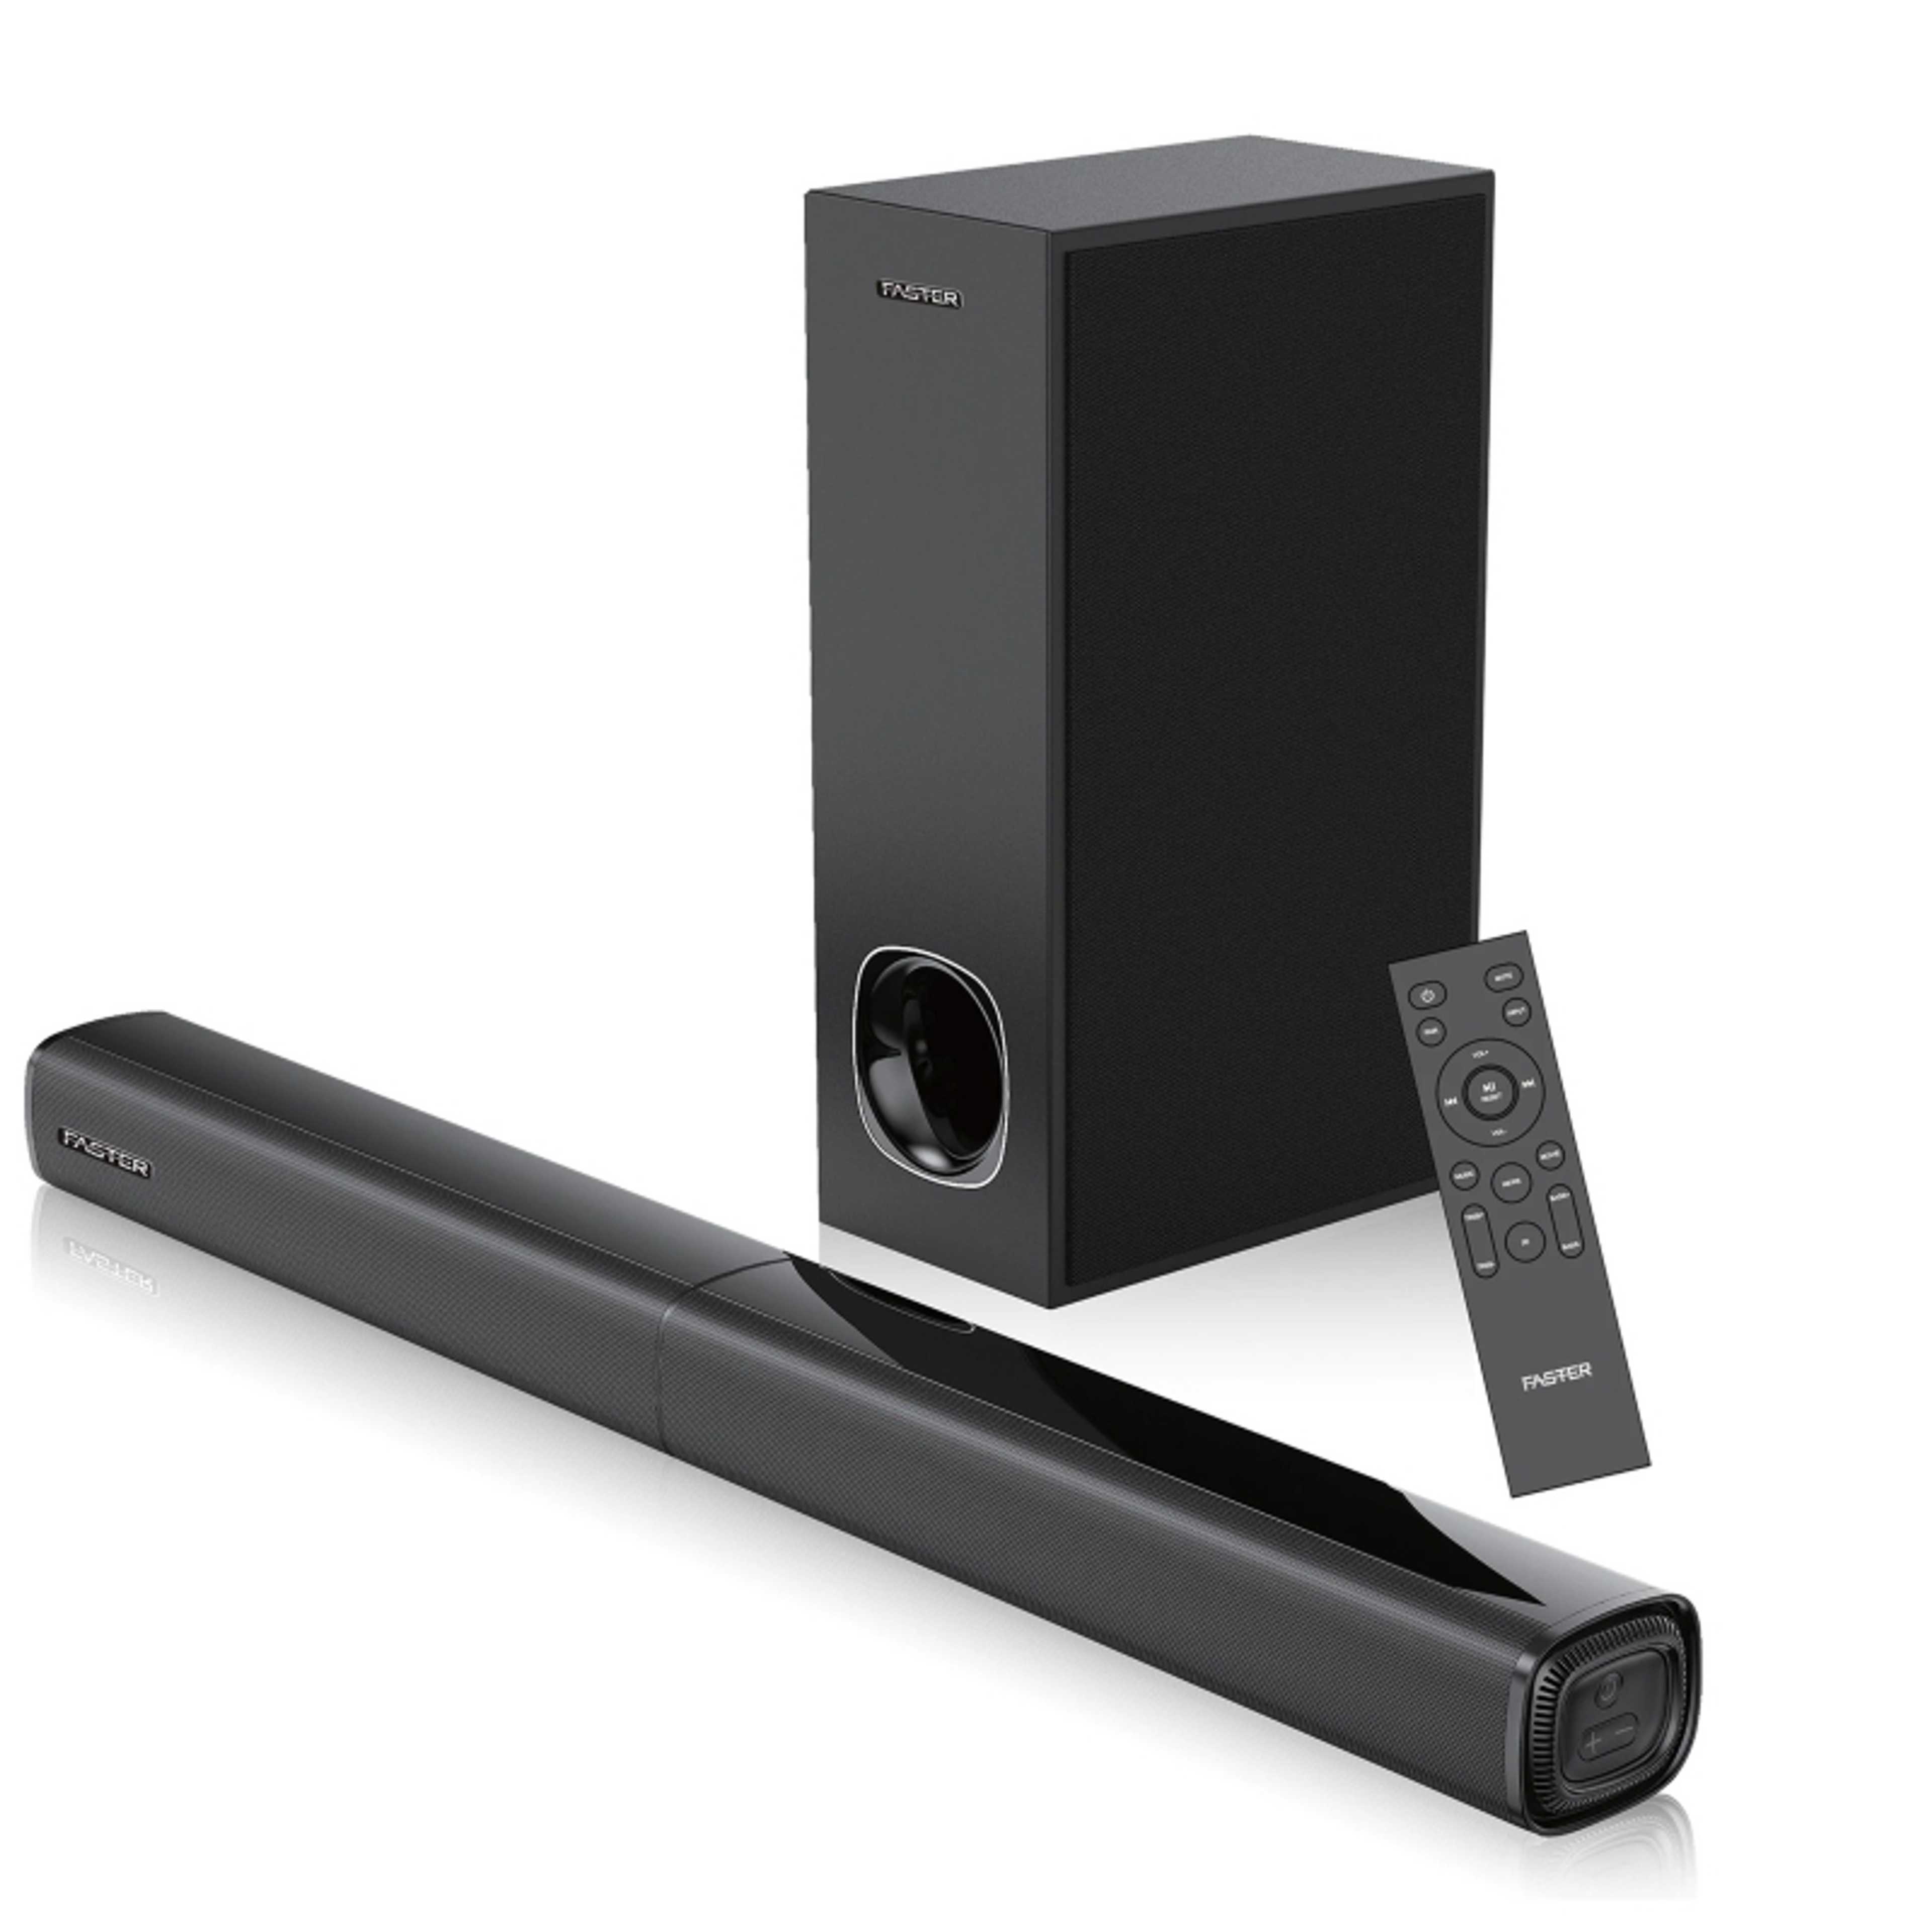 FASTER XB7000 Sound Bar - 80W Sound Bar Speaker With Woofer - Bluetooth Sound Bar For Led / Lcd / Pc - Sound Likes Movie Theater - Speaker Sound Bar For Gaming